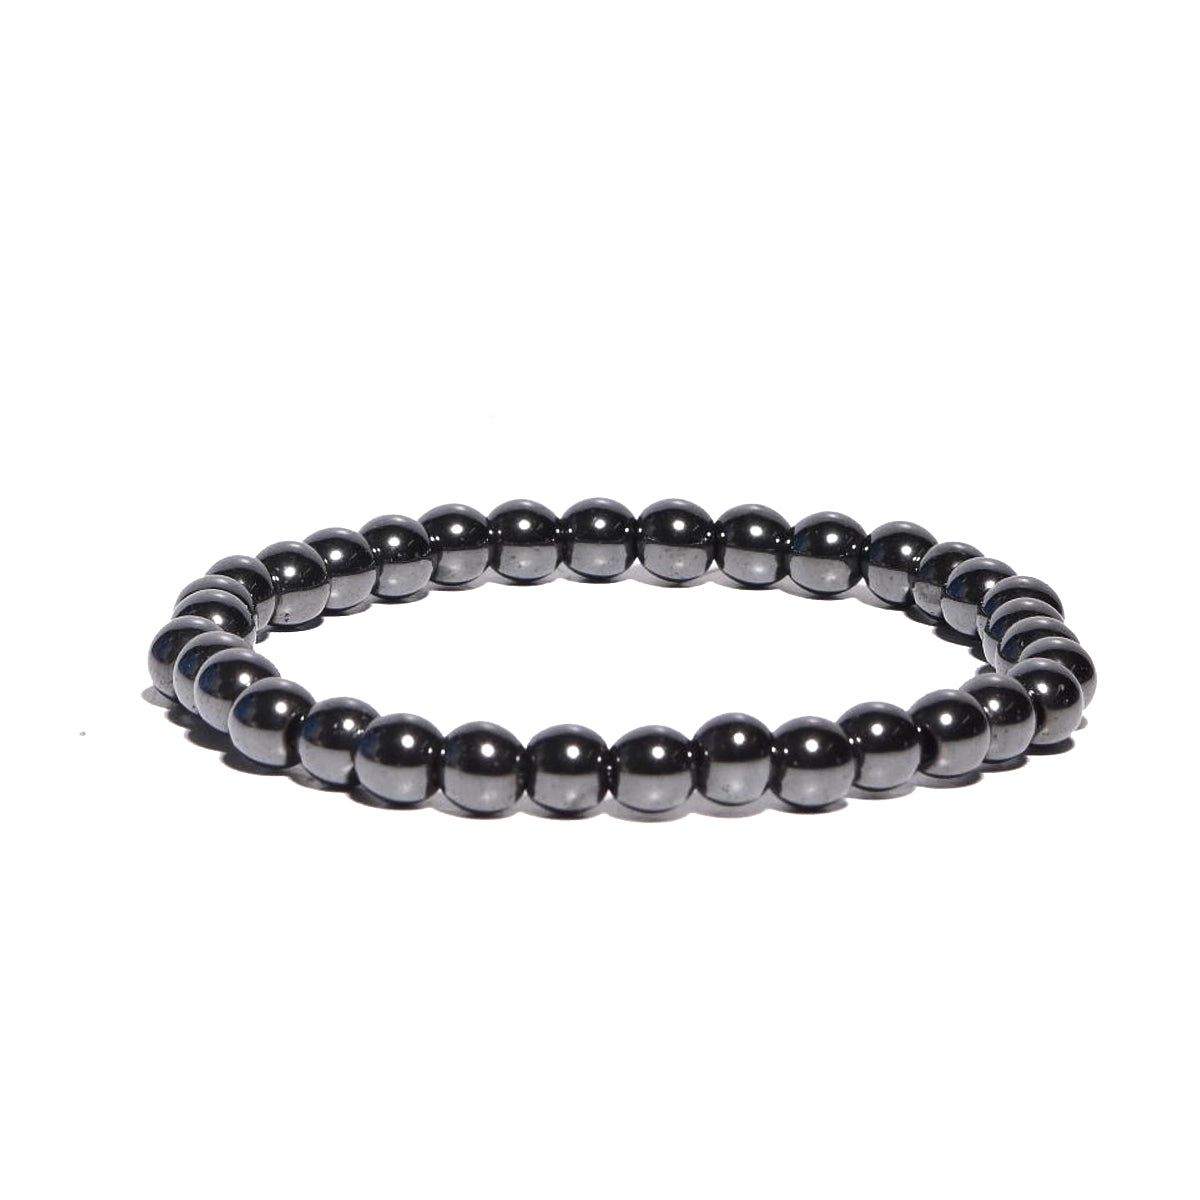 Buy Magnetic Hematite Pain Therapy Bracelet or Anklet Use for Arthritis,  Triple Strength, Gift for Women, Black Polished Beads, Round Beads Online  in India - Etsy